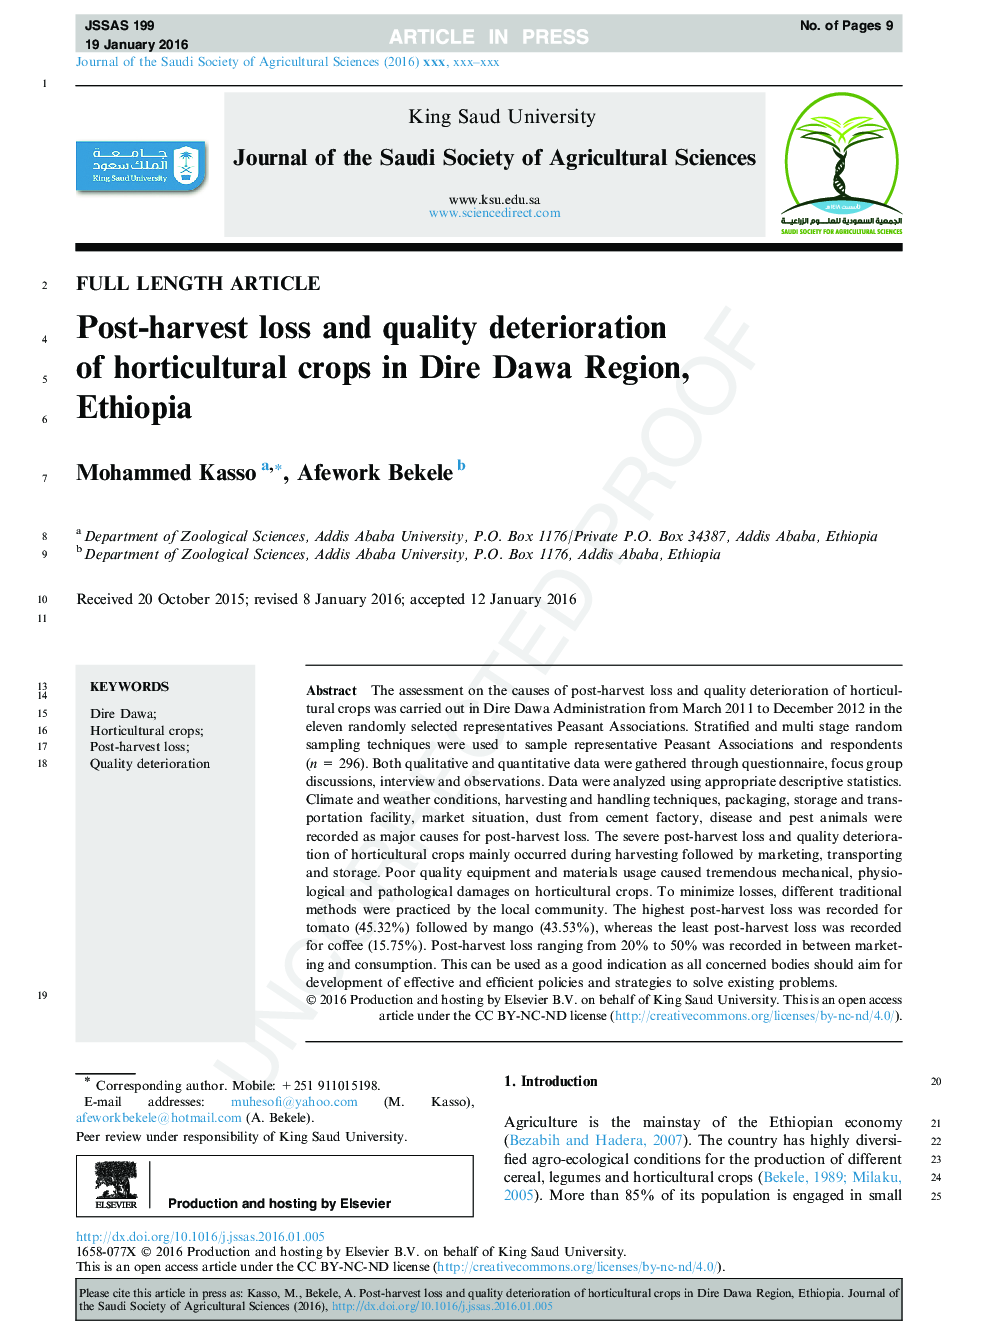 Post-harvest loss and quality deterioration of horticultural crops in Dire Dawa Region, Ethiopia